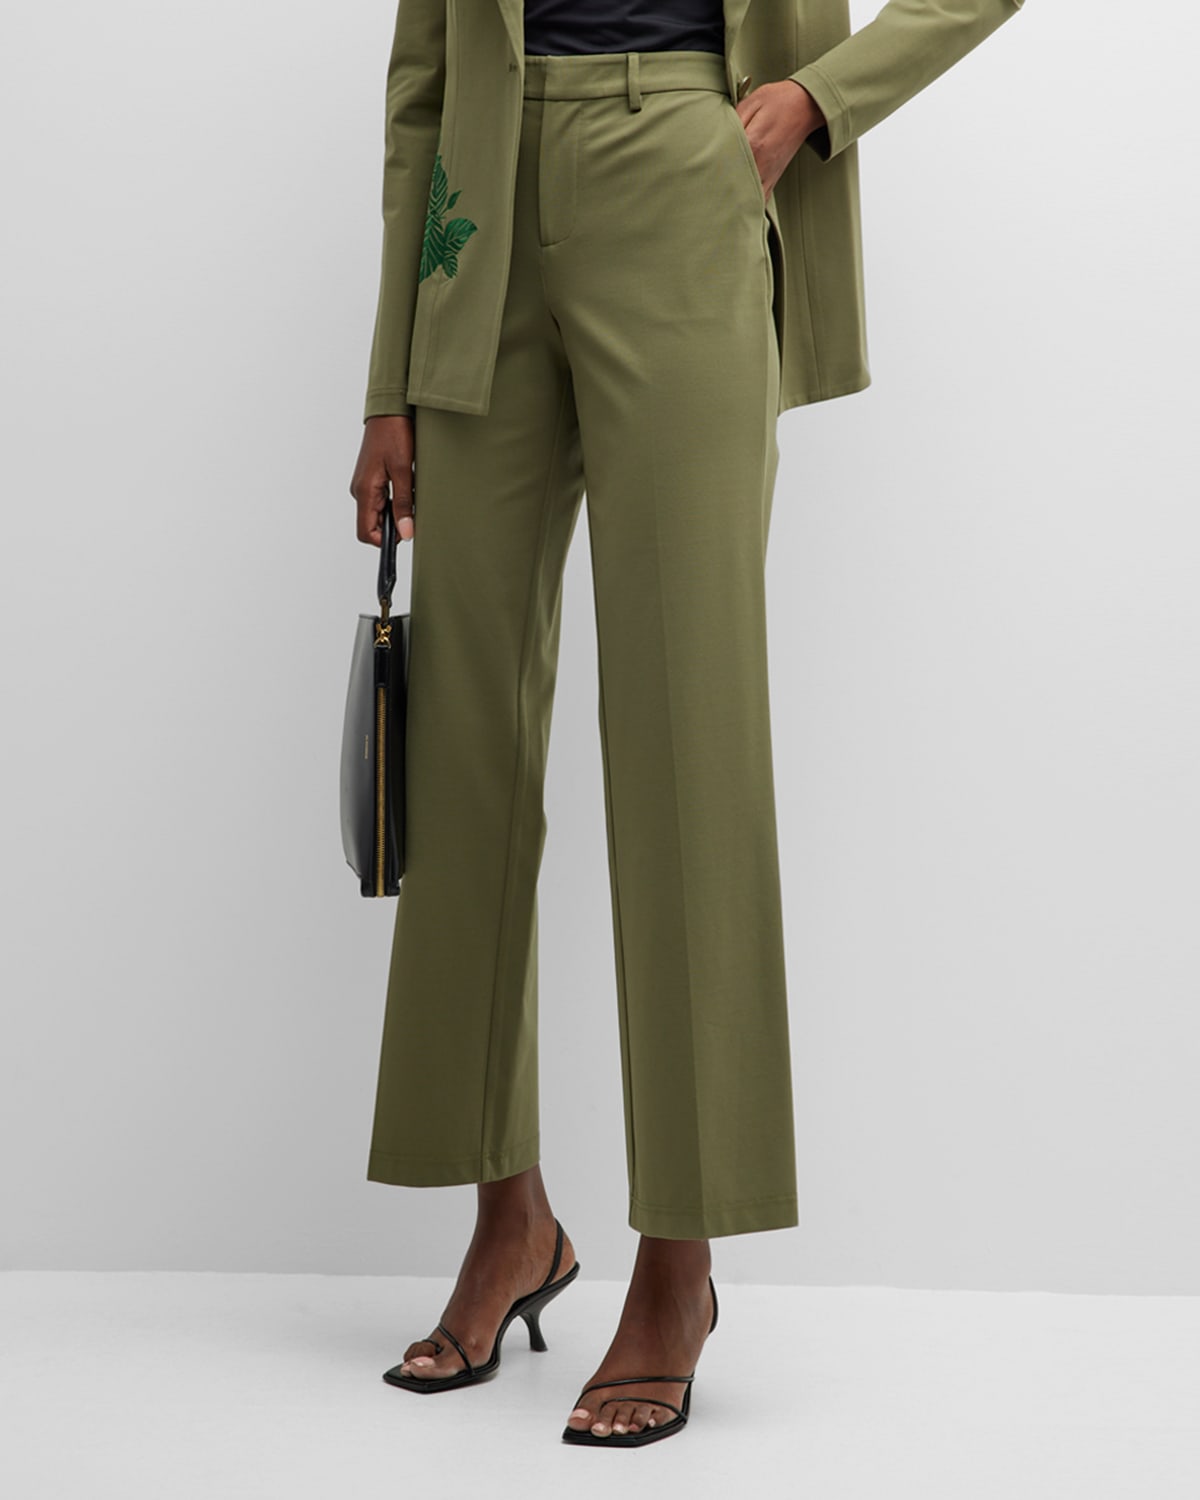 CAPSULE 121 The Hector Cropped Straight-Leg Pants